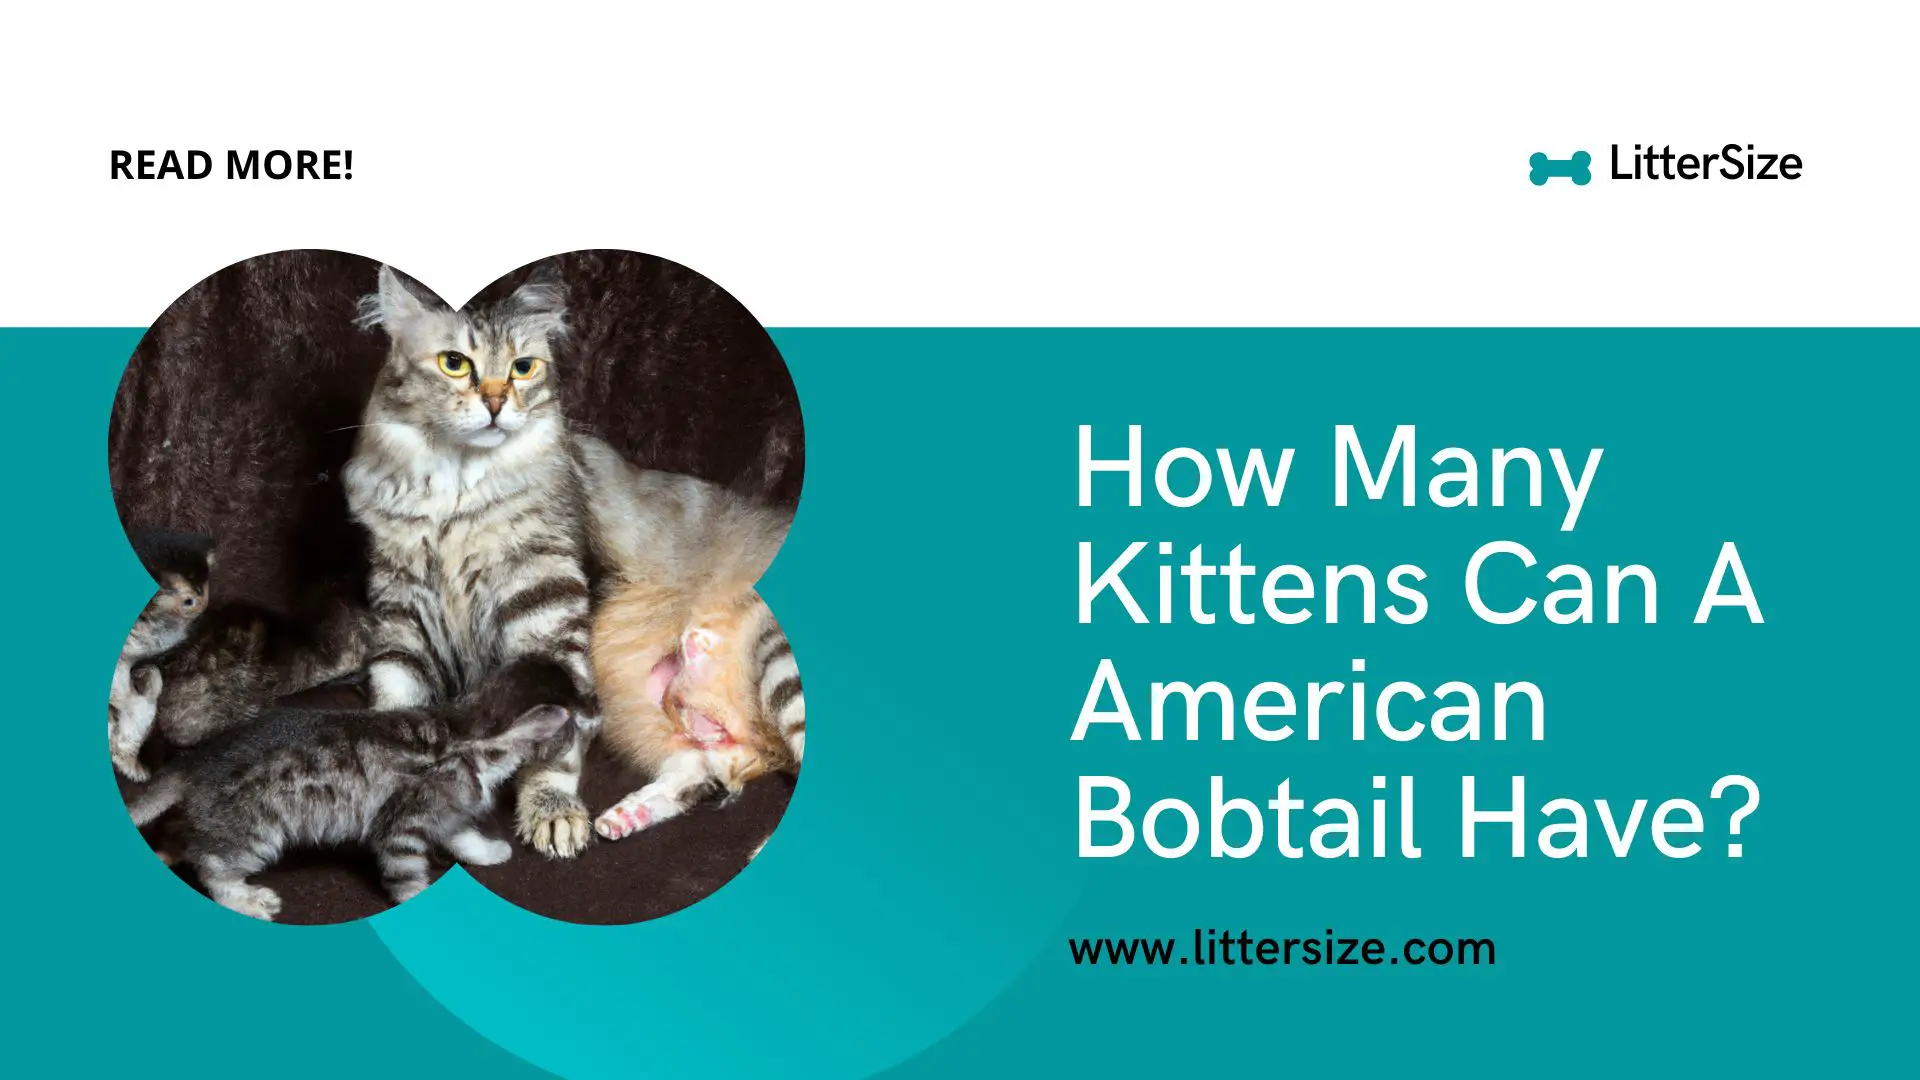 How Many Kittens Can A American Bobtail Have?